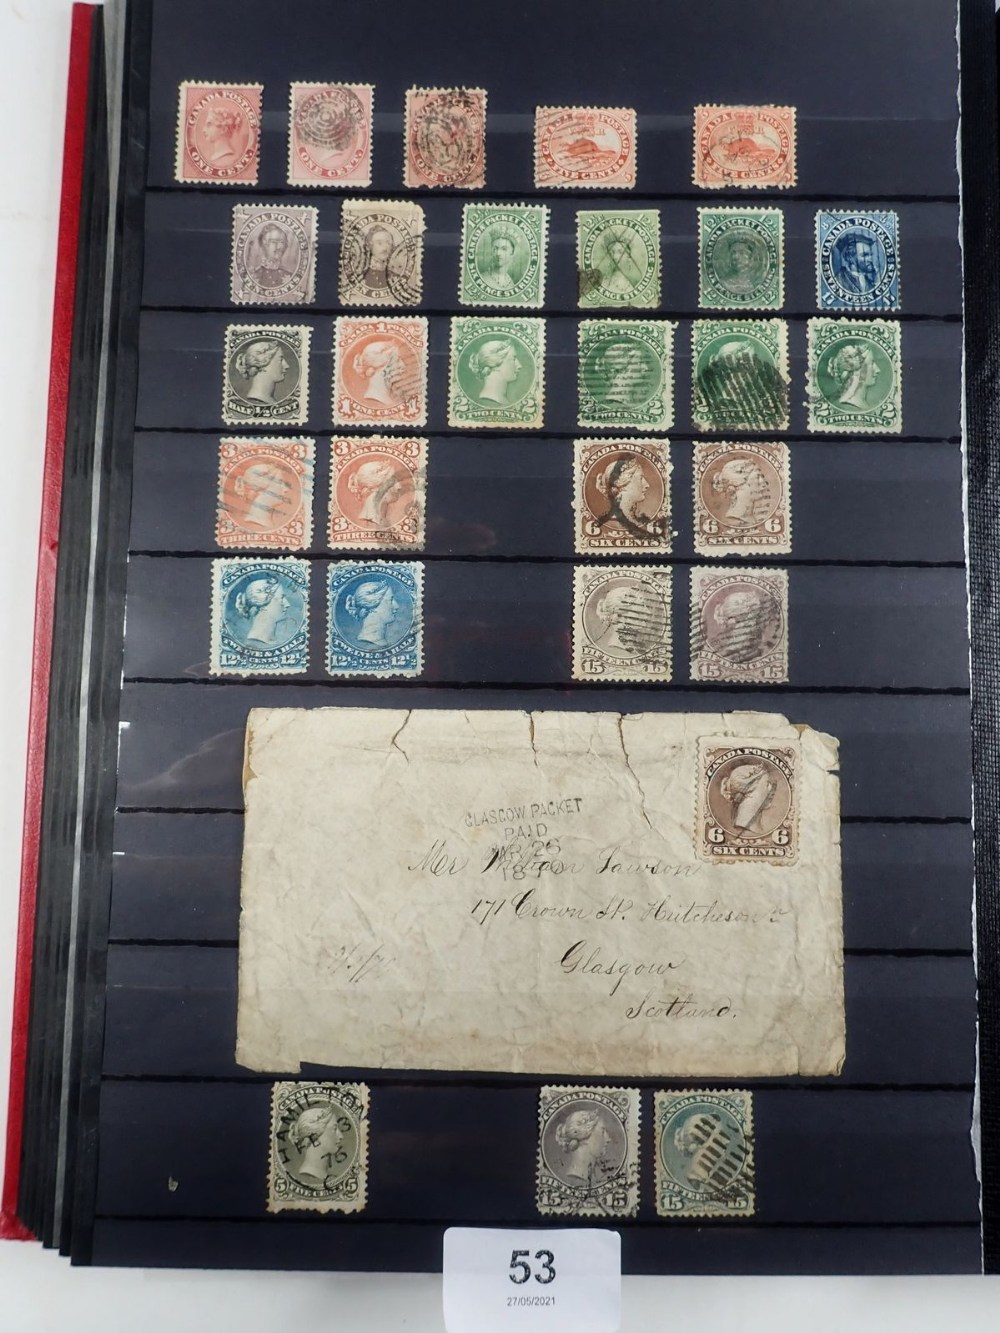 Canada & Provinces: Red 48 page Leuchtturm stock-book full of QV-QEII mint & used issues from 1859-